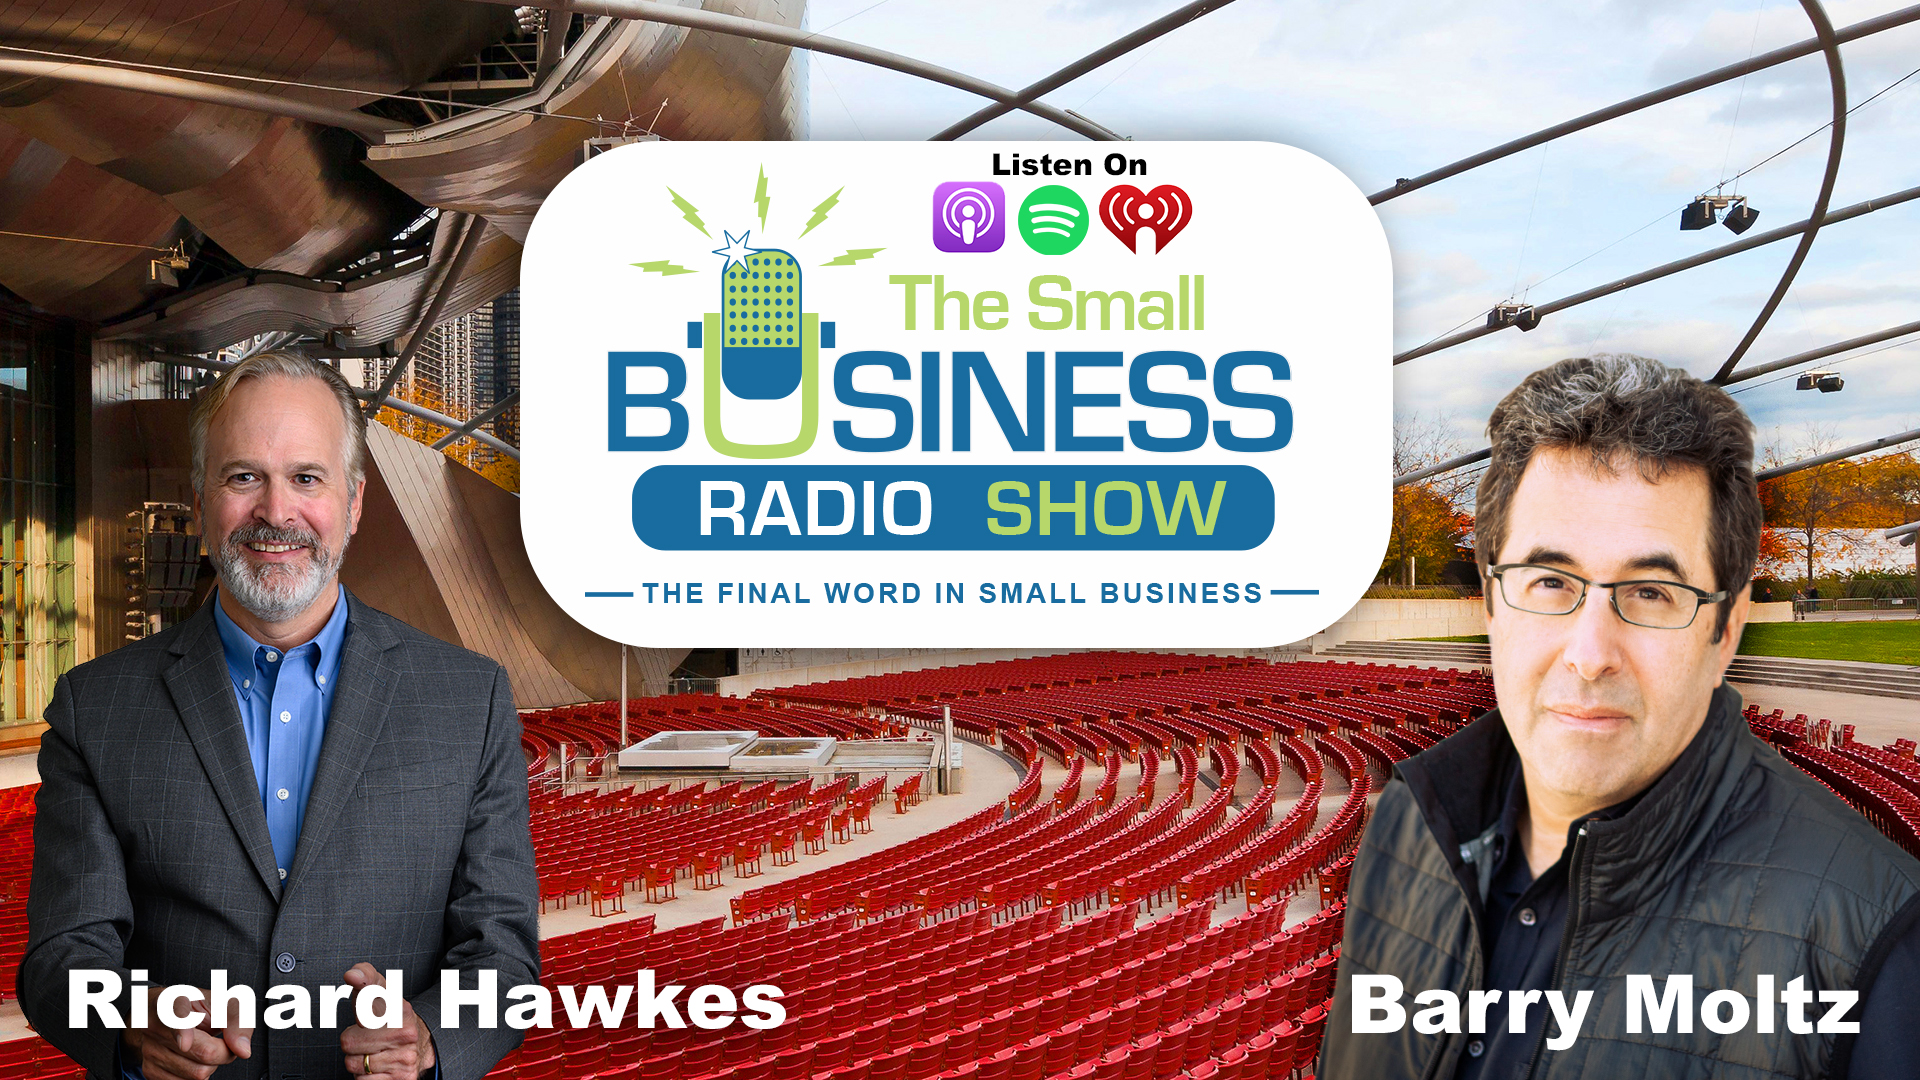 Richard Hawkes on The Small Business Radio Sihow